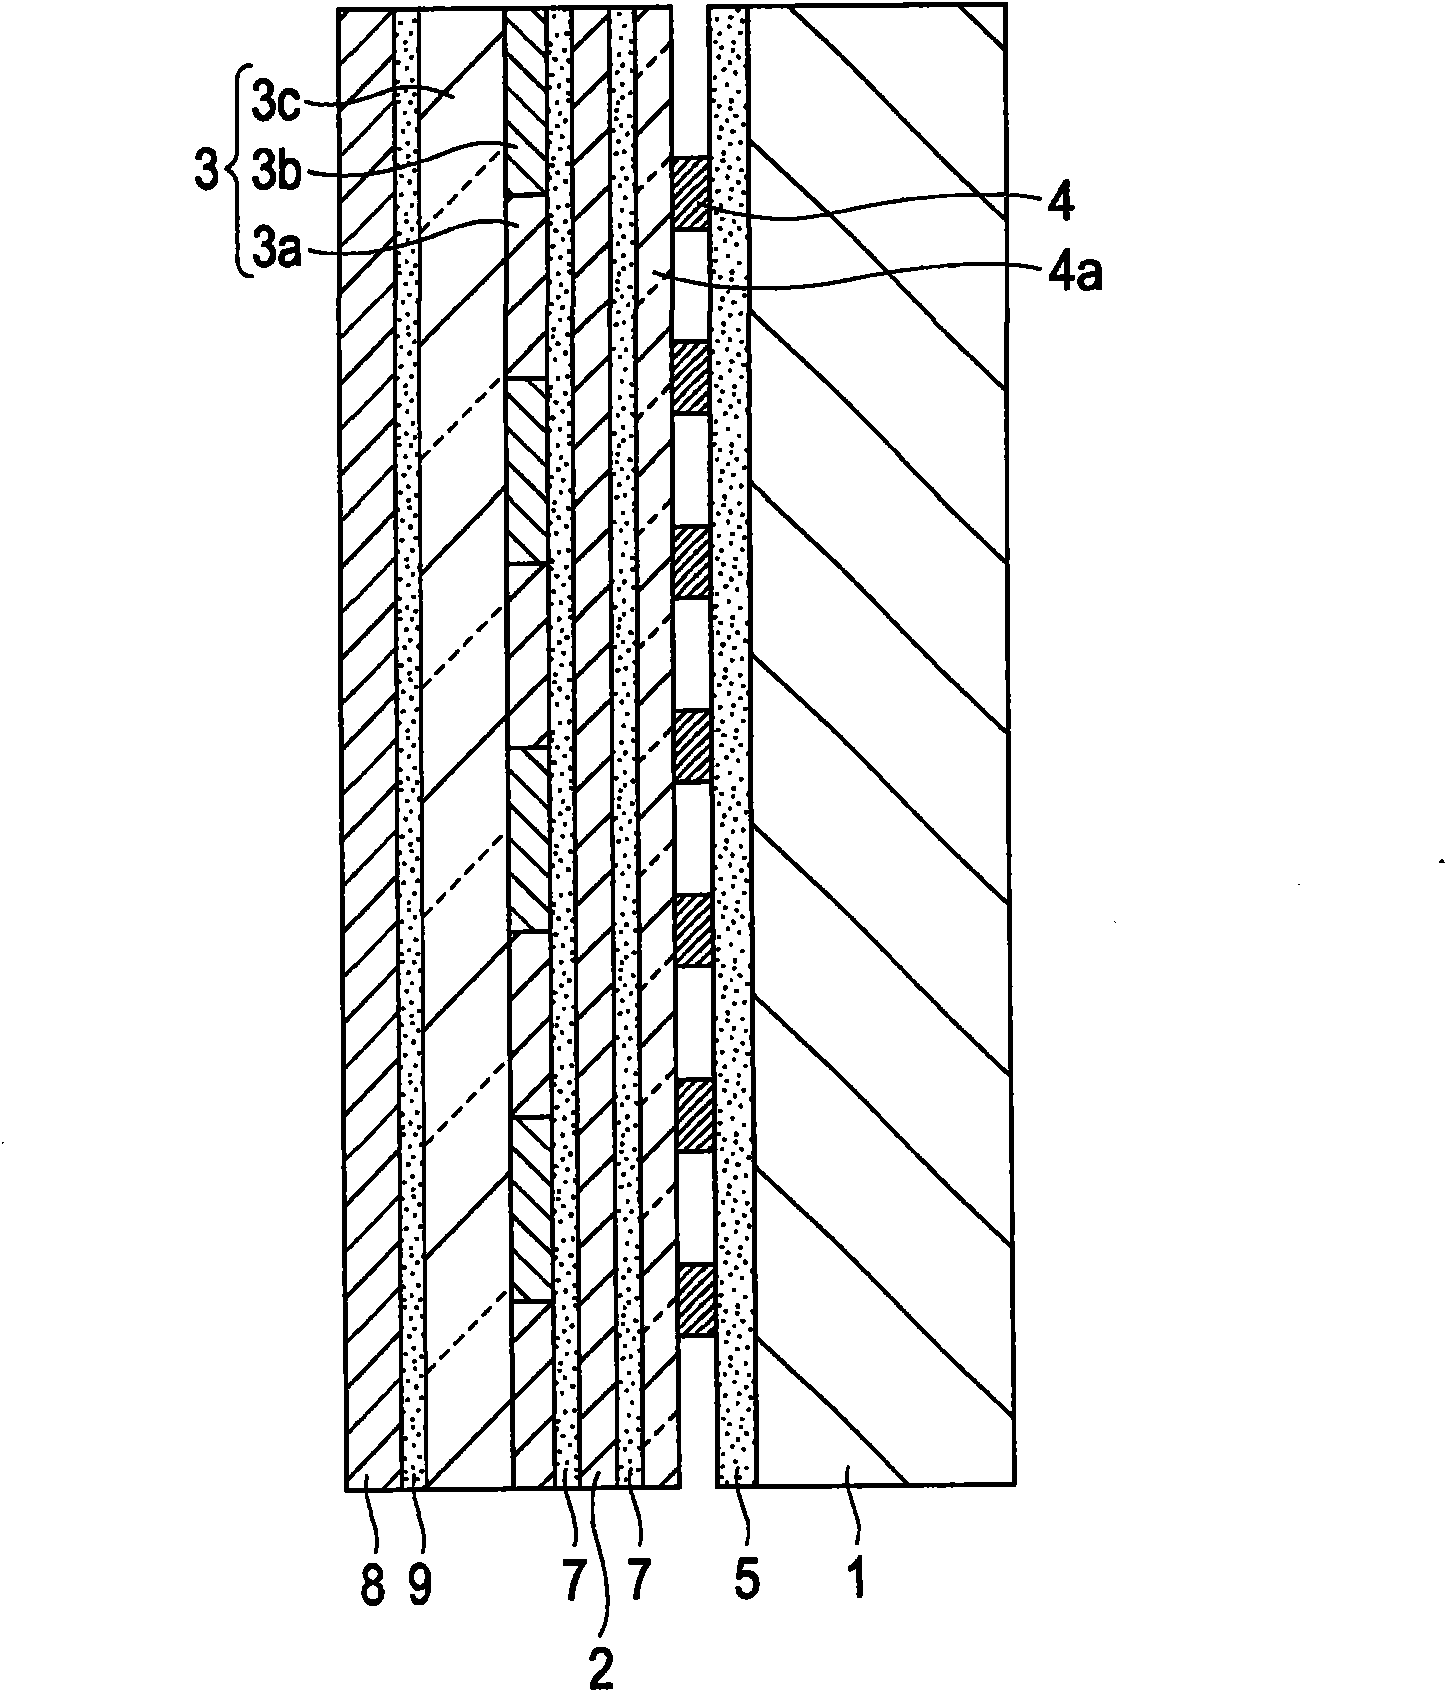 Stereoscopic image display and method for producing the same